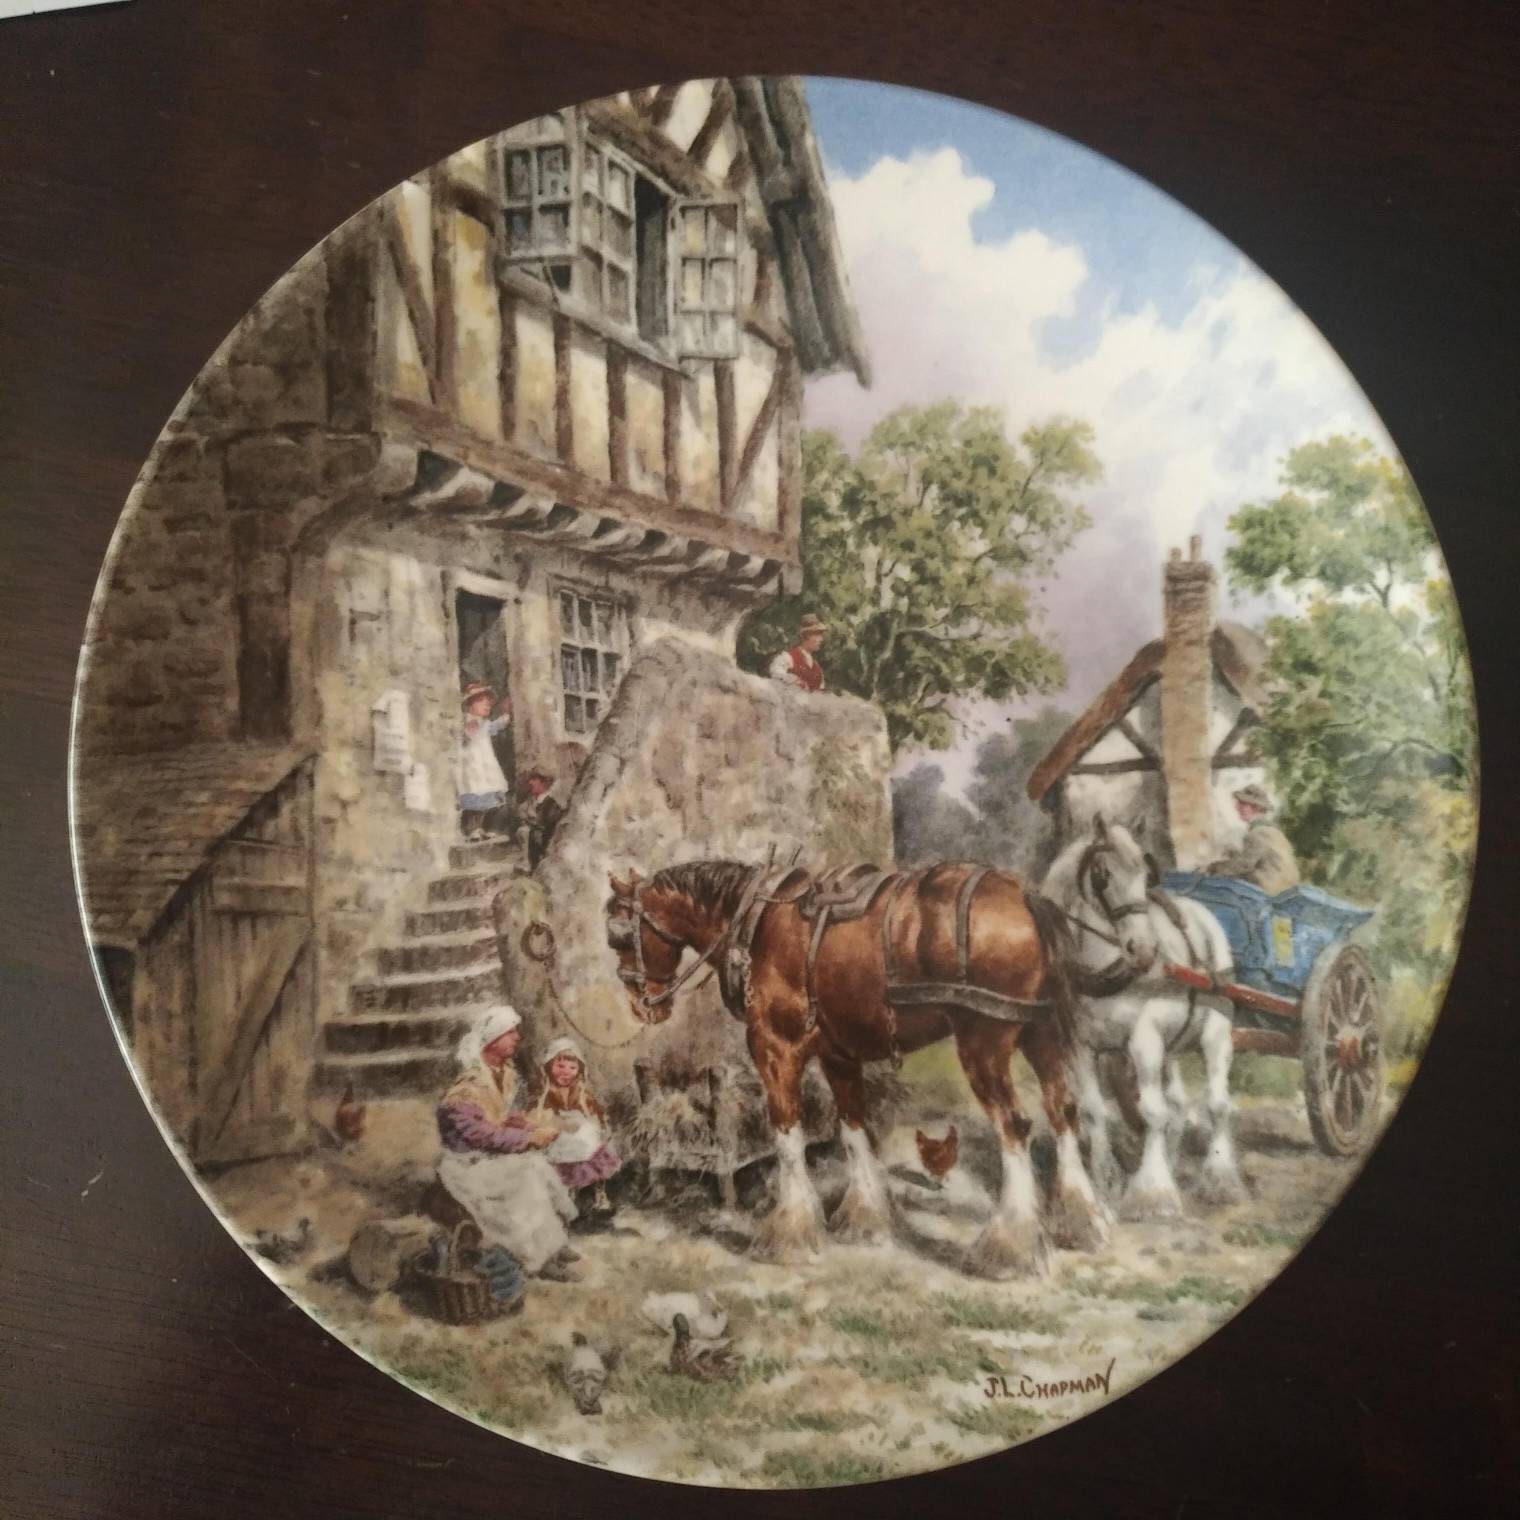 Vintage 1988 Wedgwood Life on the Farm Plates VintageDetola Decorative Display Plates Off to Work plate Morning in the Farmyard plate